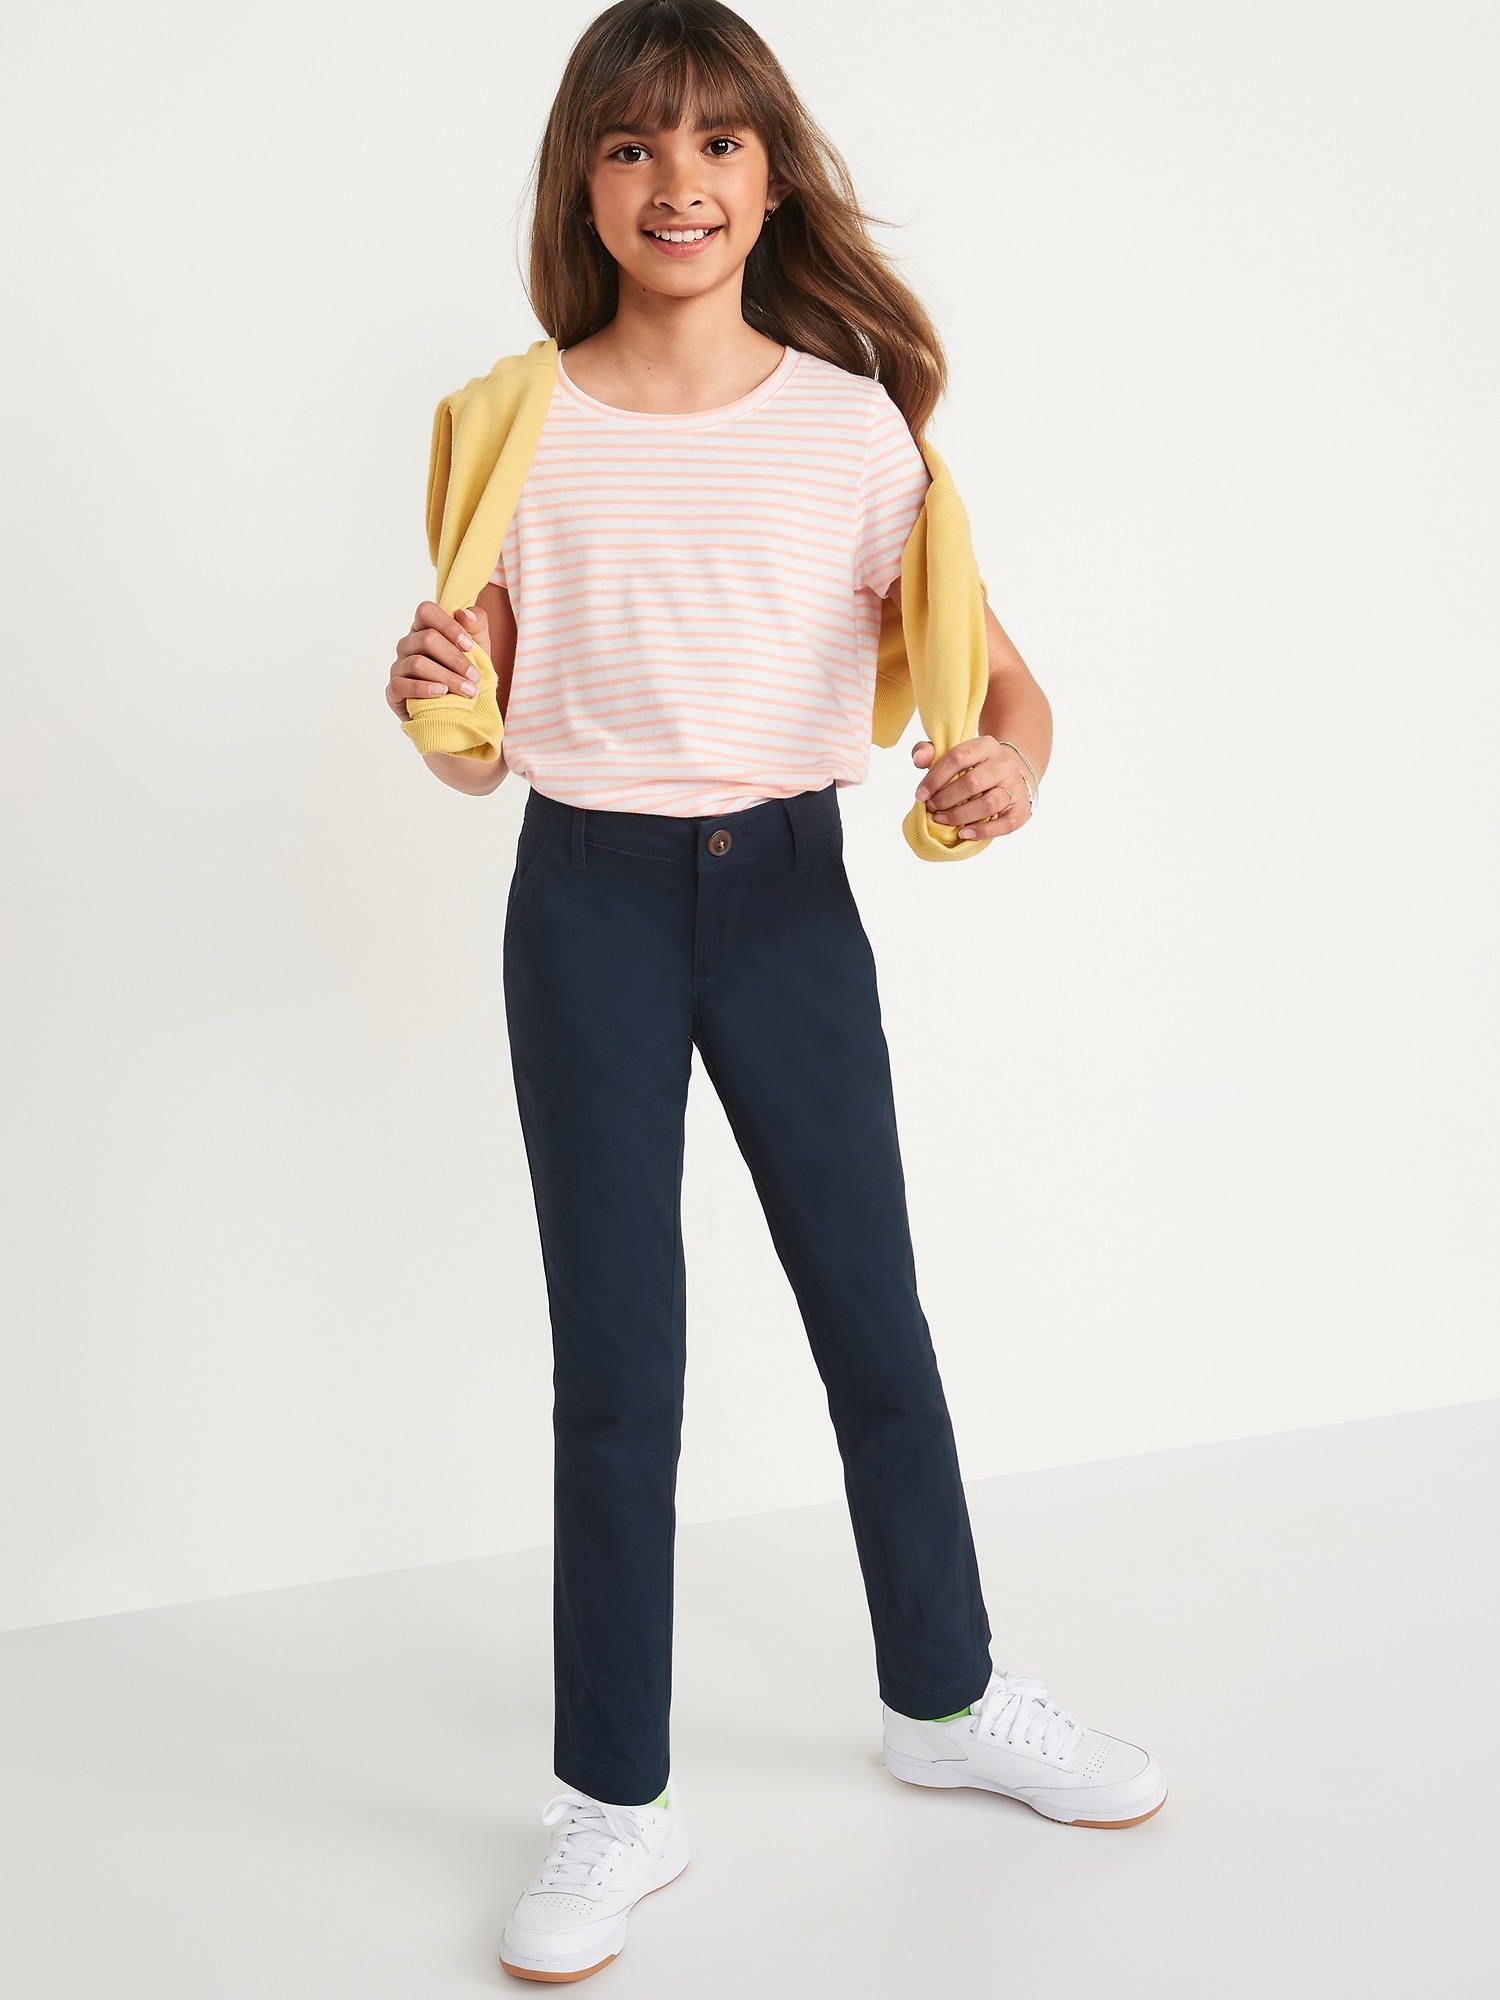 Old Navy School Uniform Boot-Cut Pants 2-Pack for Girls